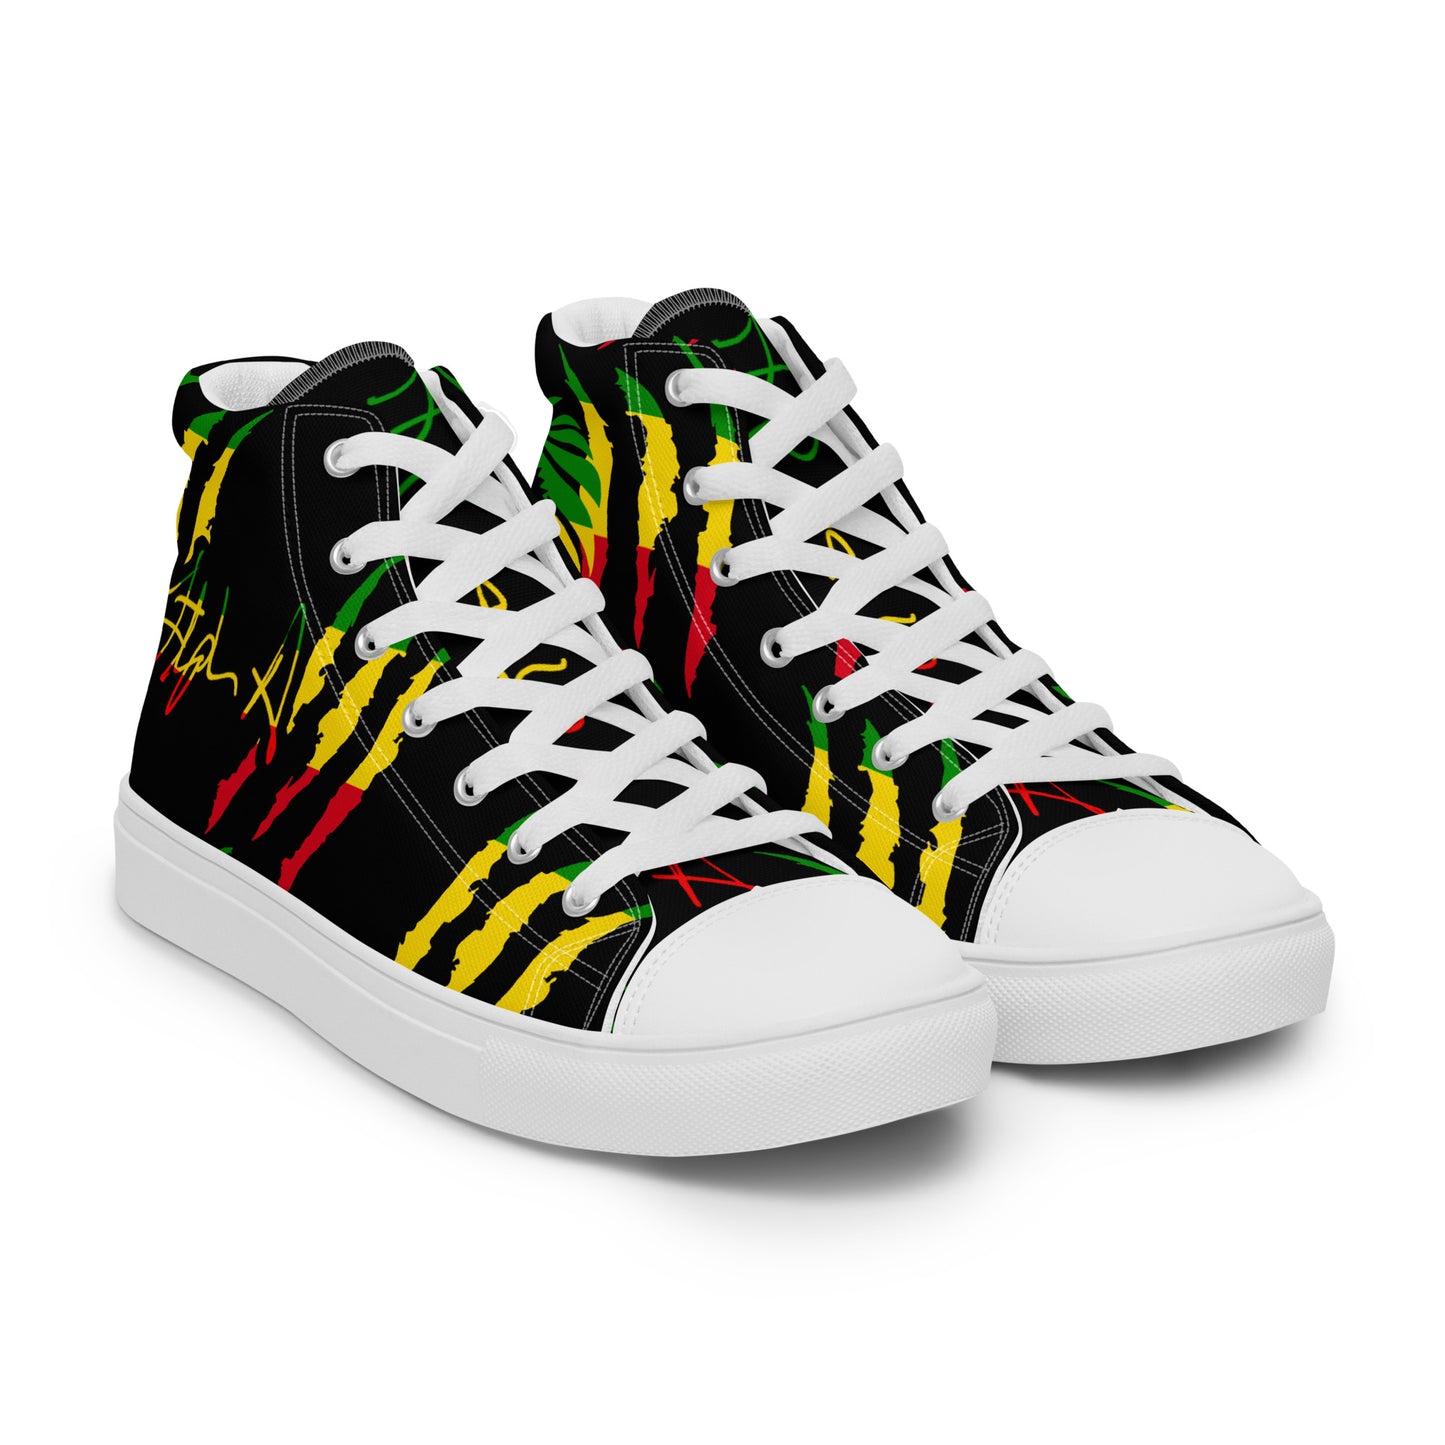 Red Gold and Green Men’s high top Signature shoes by Iamstephenallen